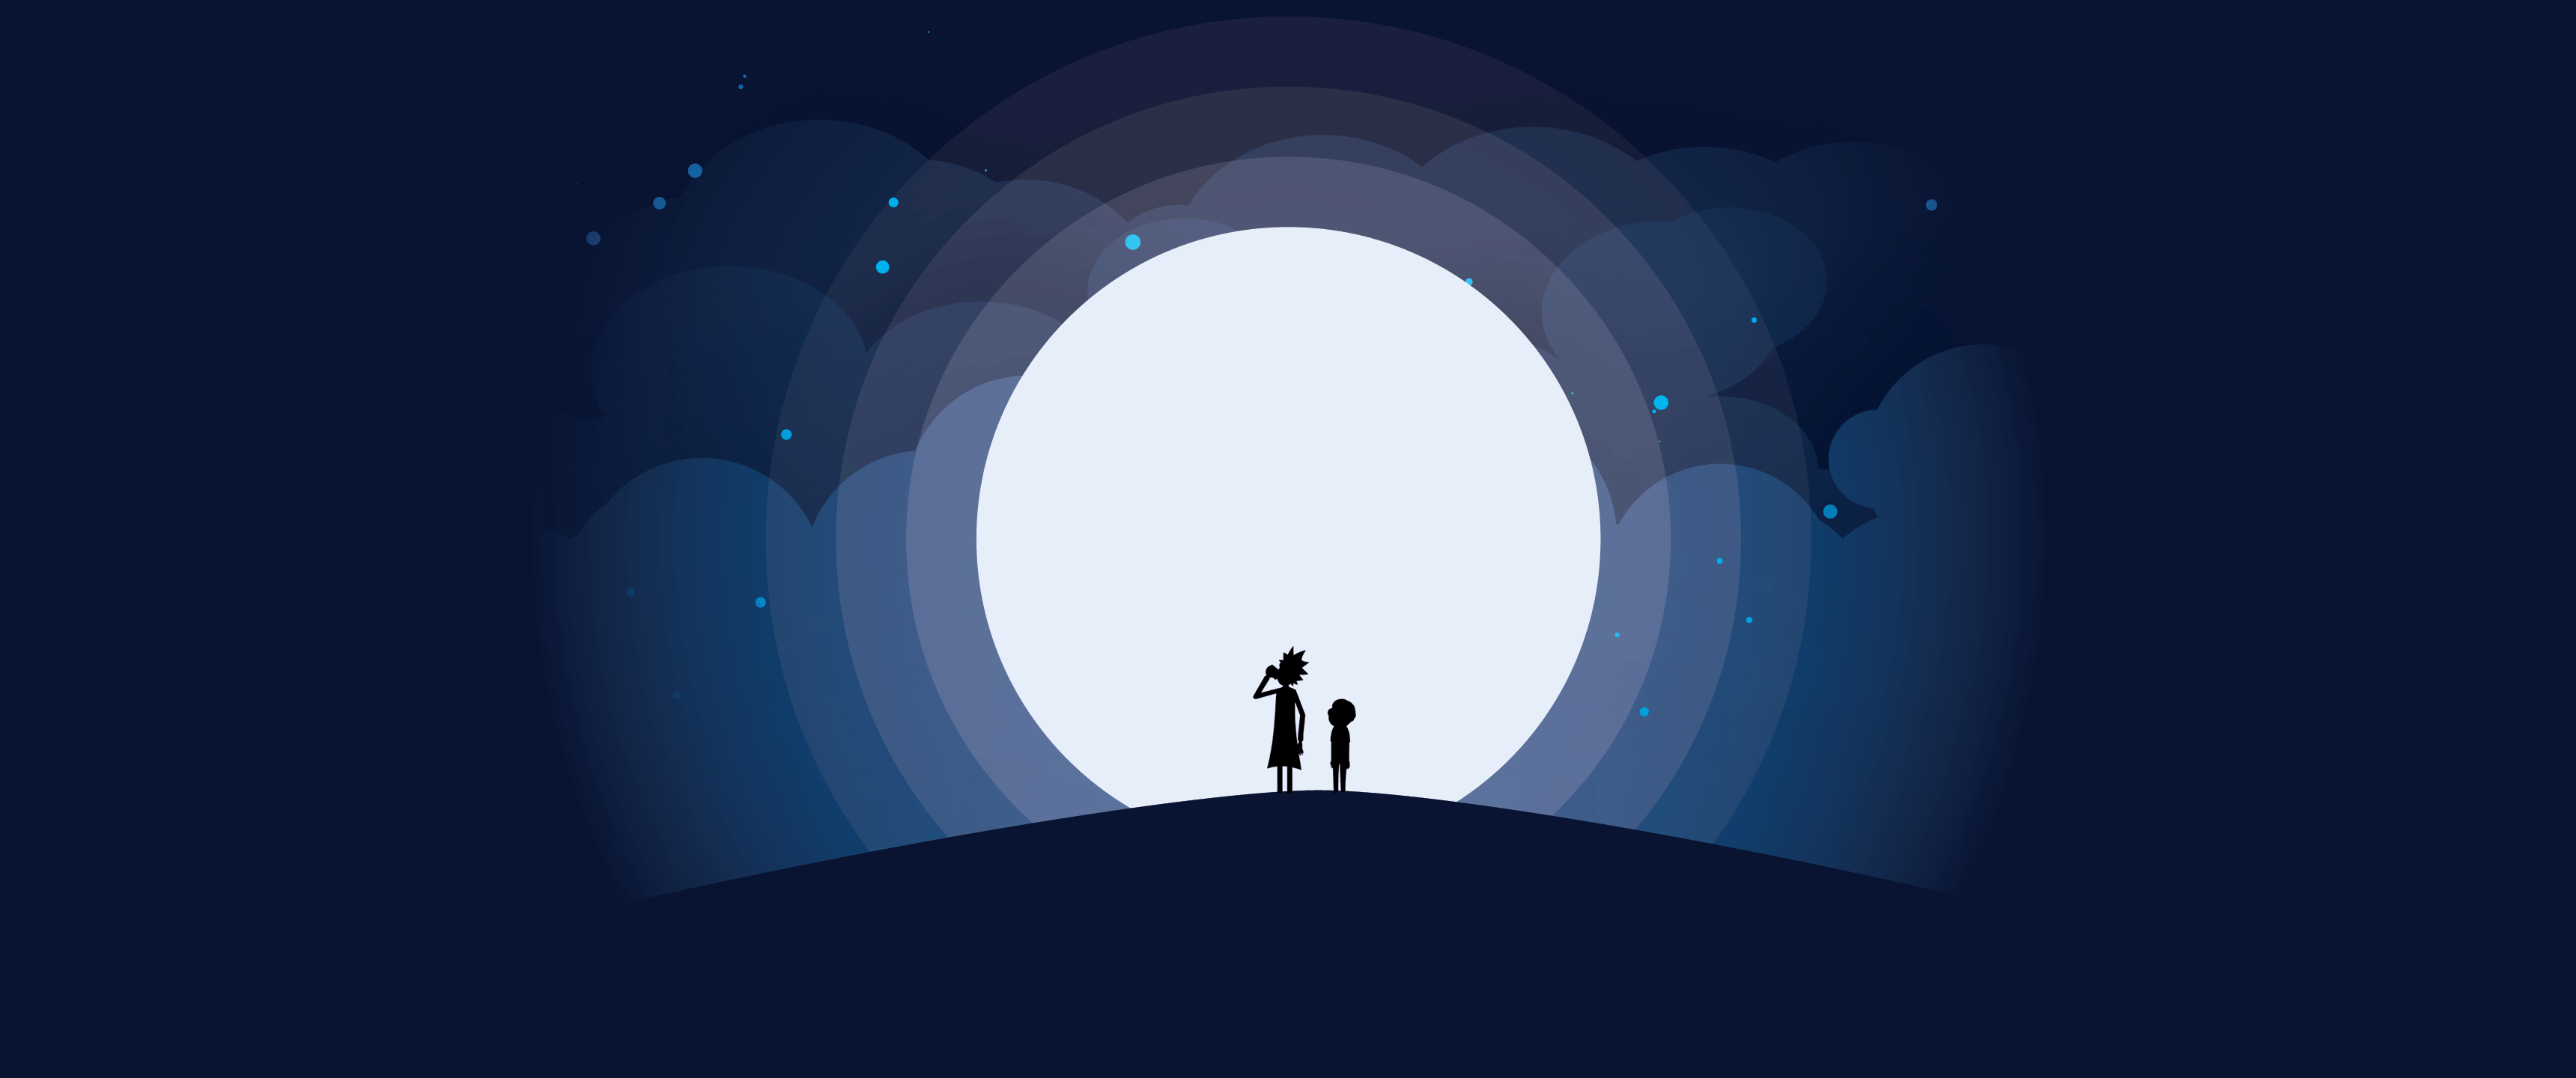 4k Resolution Rick And Morty Wallpaper Blue